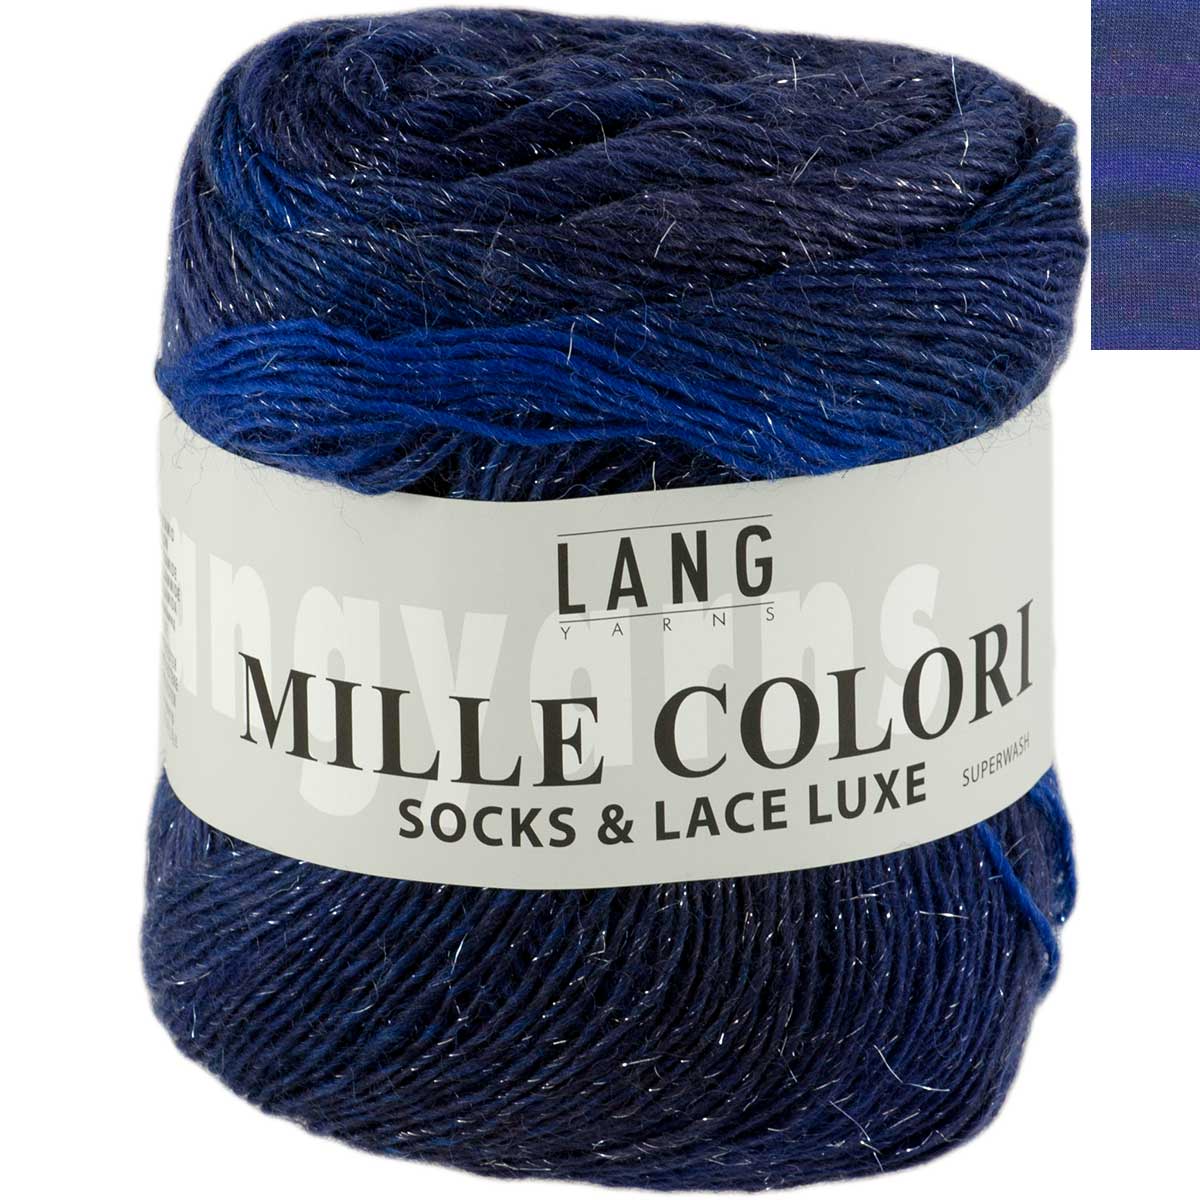 Lang Yarns Mille Colori Socks & Lace Luxe Farbe 35